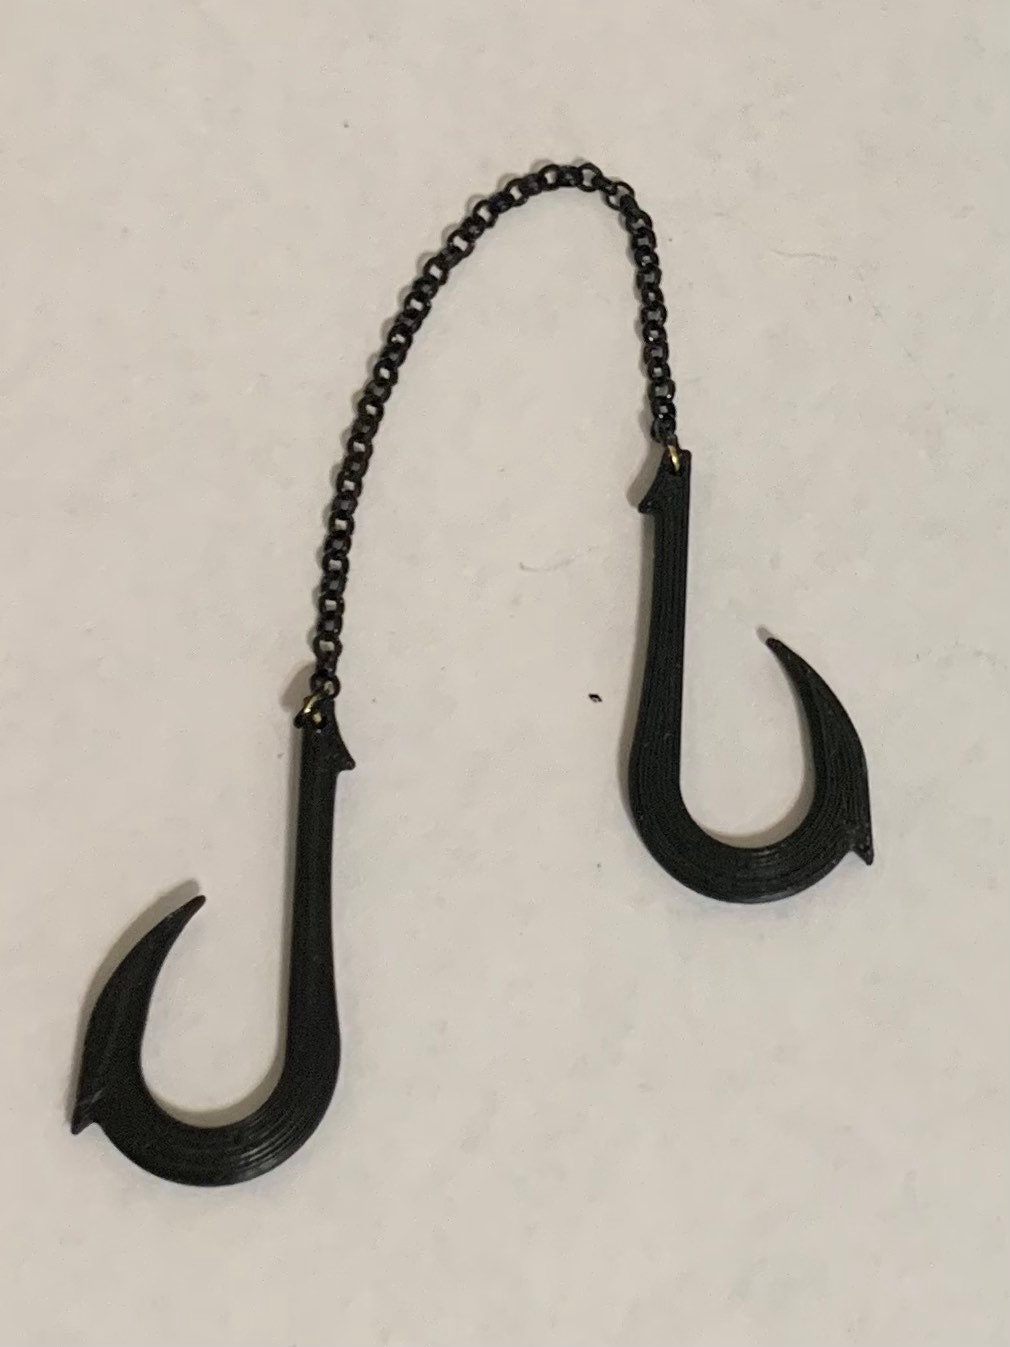 Fish Hook Torture Chain Weapon Miniature 1:12 Scale for Action